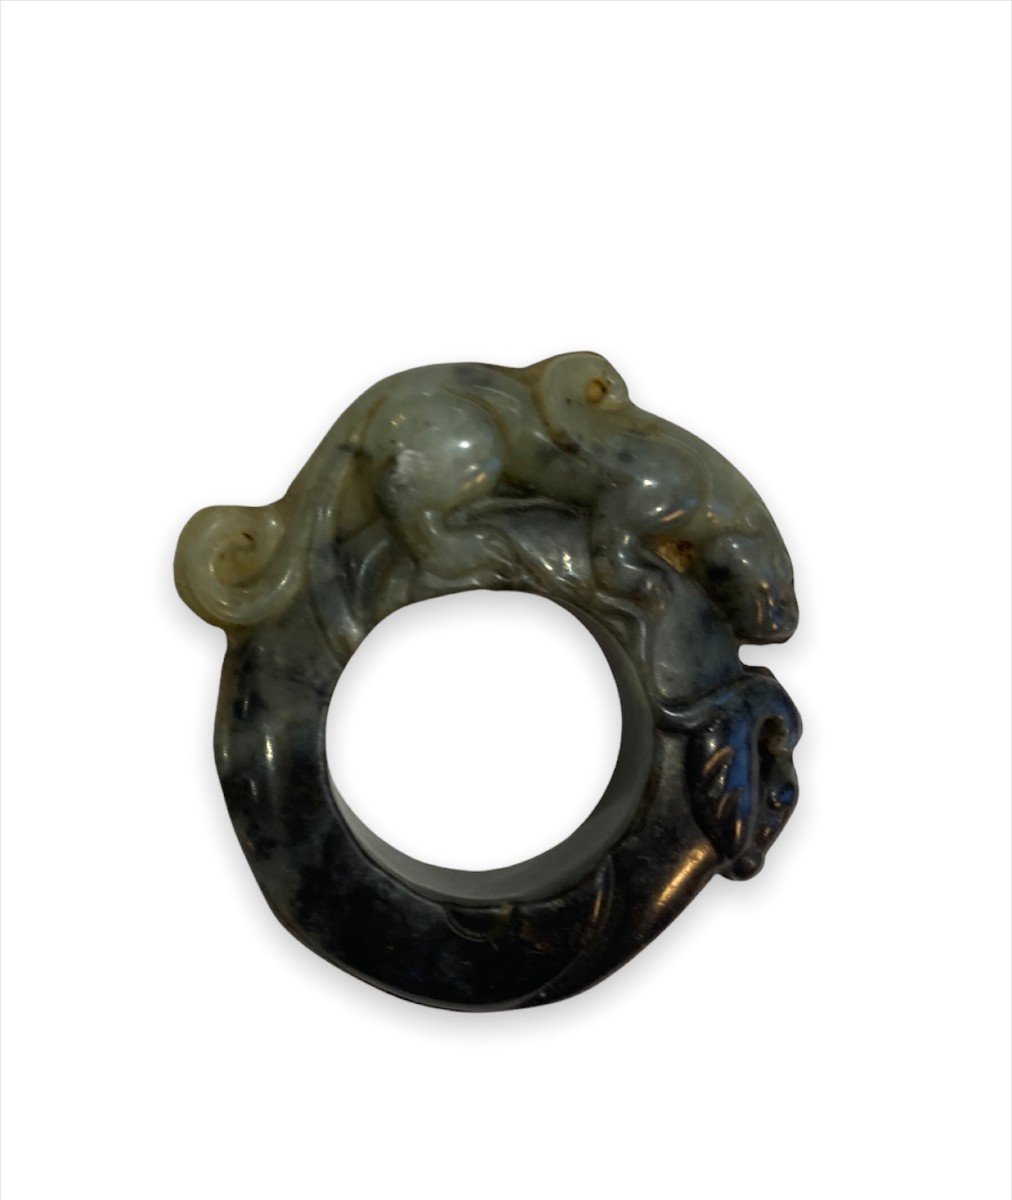 Green Nephrite Jade Ring With Dragon Pattern - China Early 20th Century-photo-3